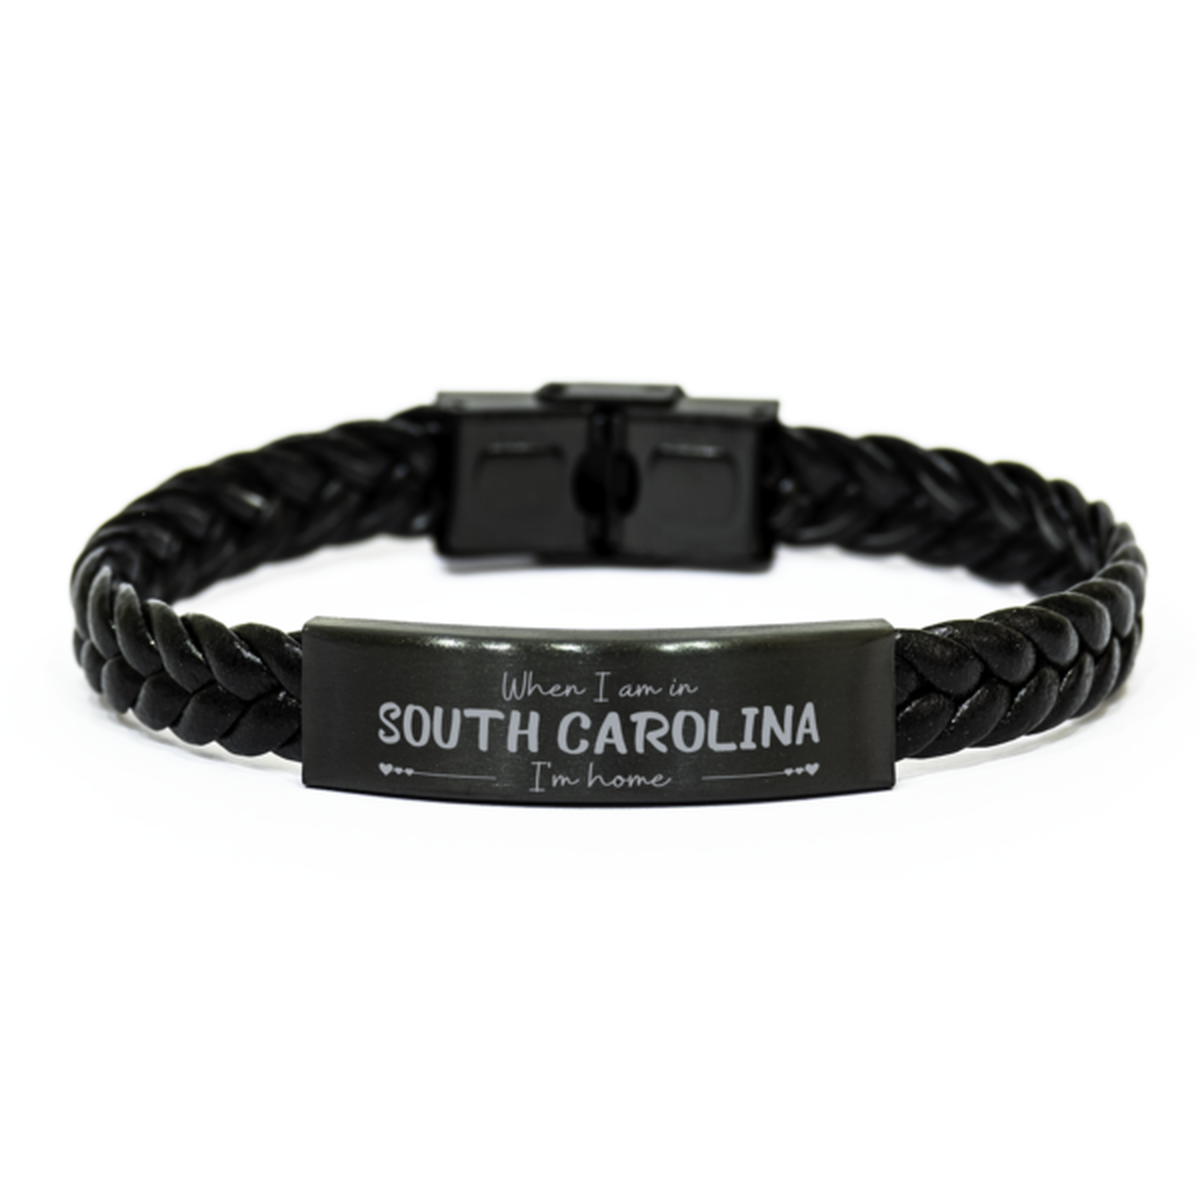 When I am in South Carolina I'm home Braided Leather Bracelet, Cheap Gifts For South Carolina, State South Carolina Birthday Gifts for Friends Coworker